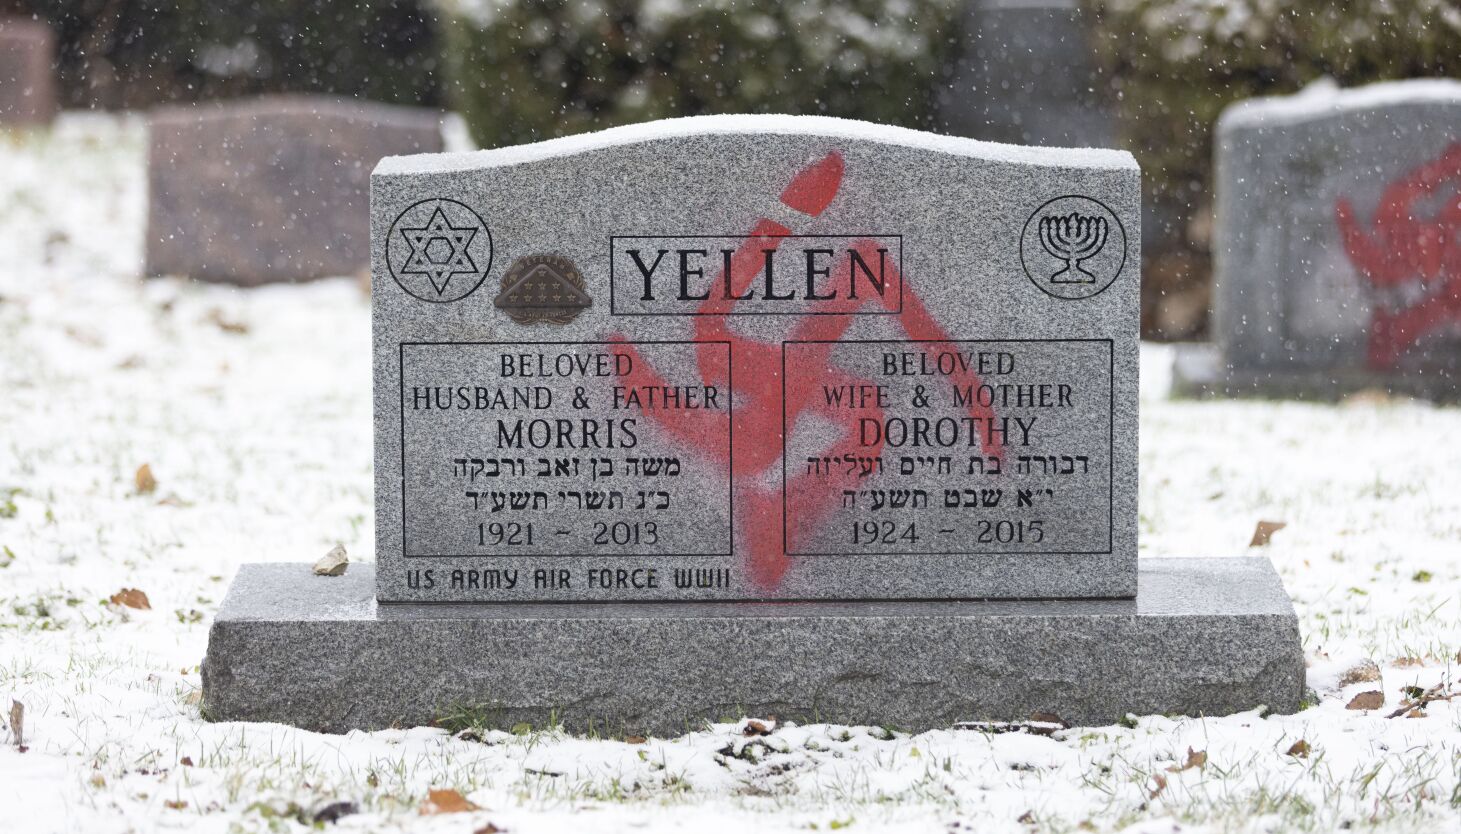  After a swastika was sprayed on my parents’ headstone, it seems like hatred toward Jews will remain forever 